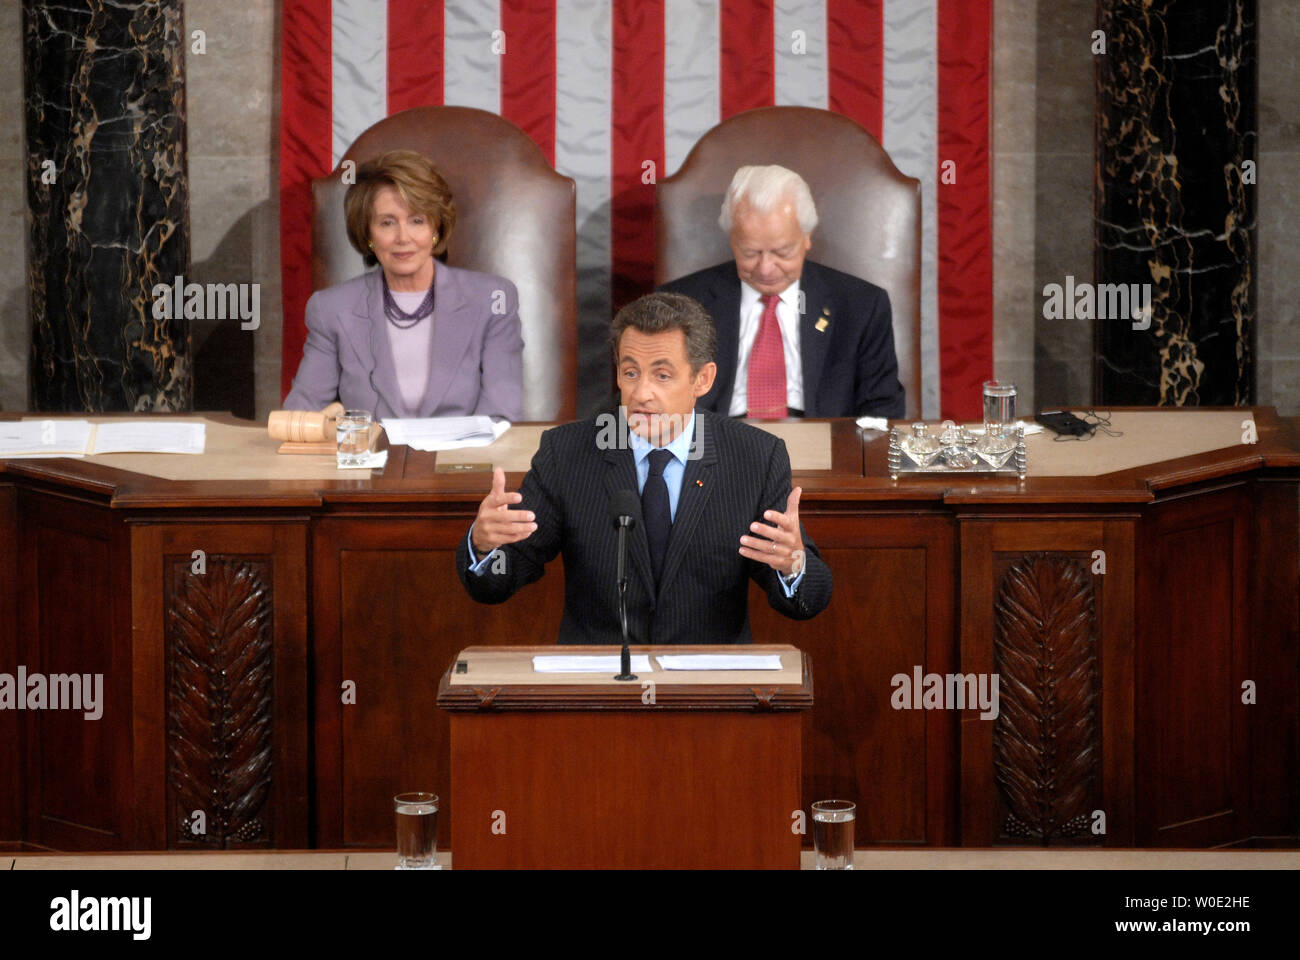 French President Nicolas Sarkozy addresses a joint meeting of Congress at the Capitol Building in Washington on November 7, 2007. Speaker of the House Nancy Pelosi and Senate President Pro Tempore Robert Byrd (D-WV) watched on. (UPI Photo/Kevin Dietsch) Stock Photo